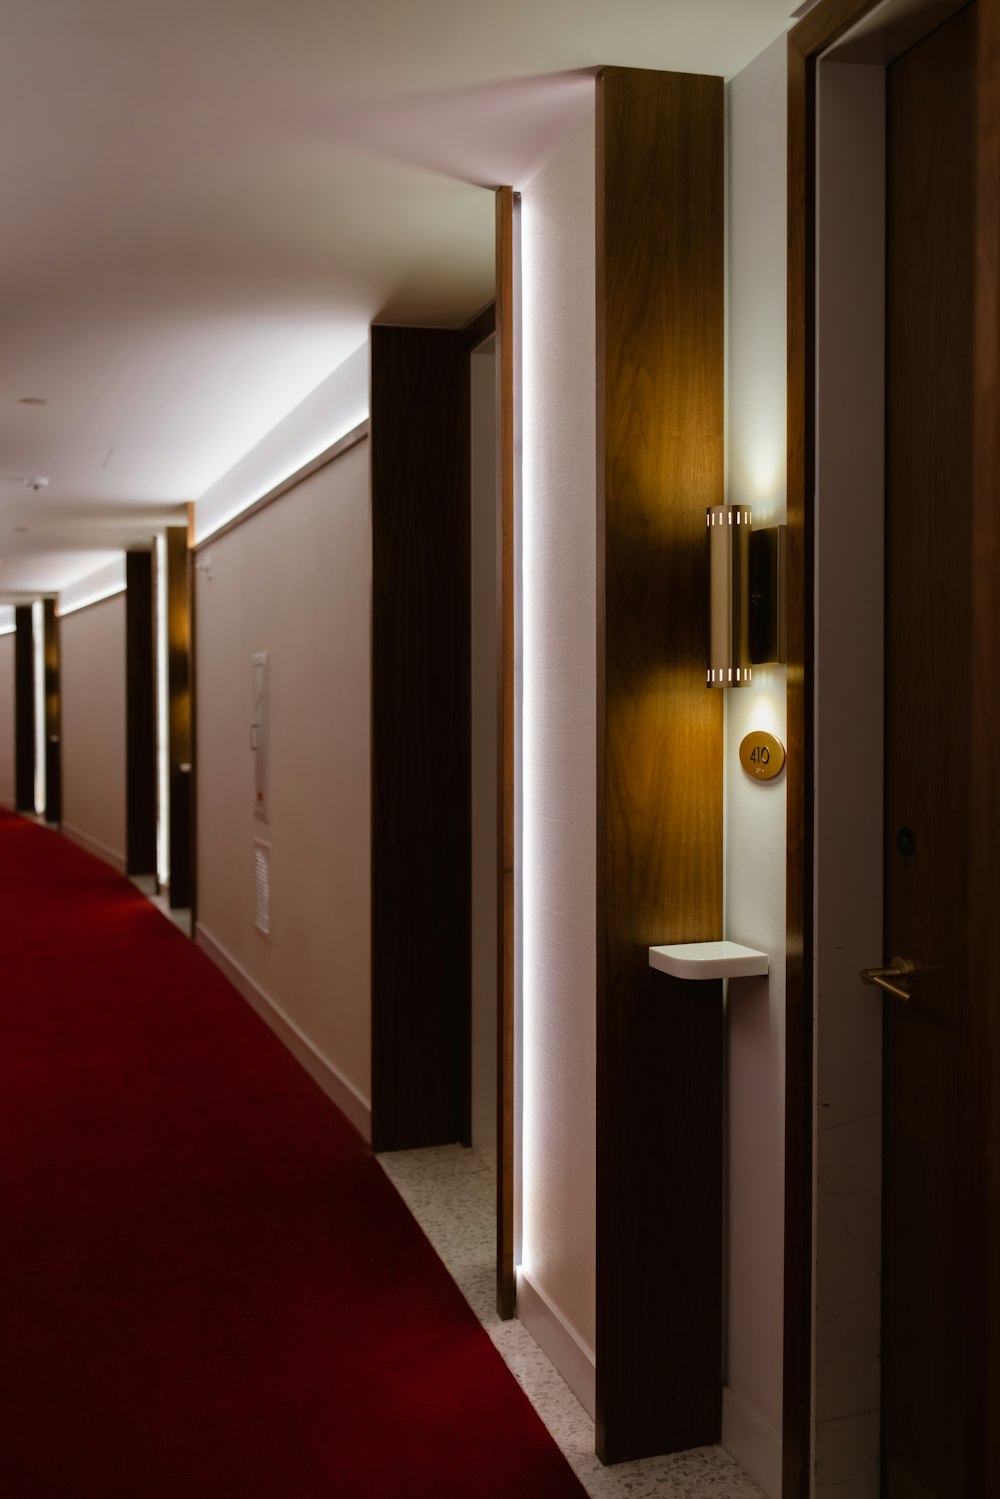 a hallway with a red carpet and a light on the wall